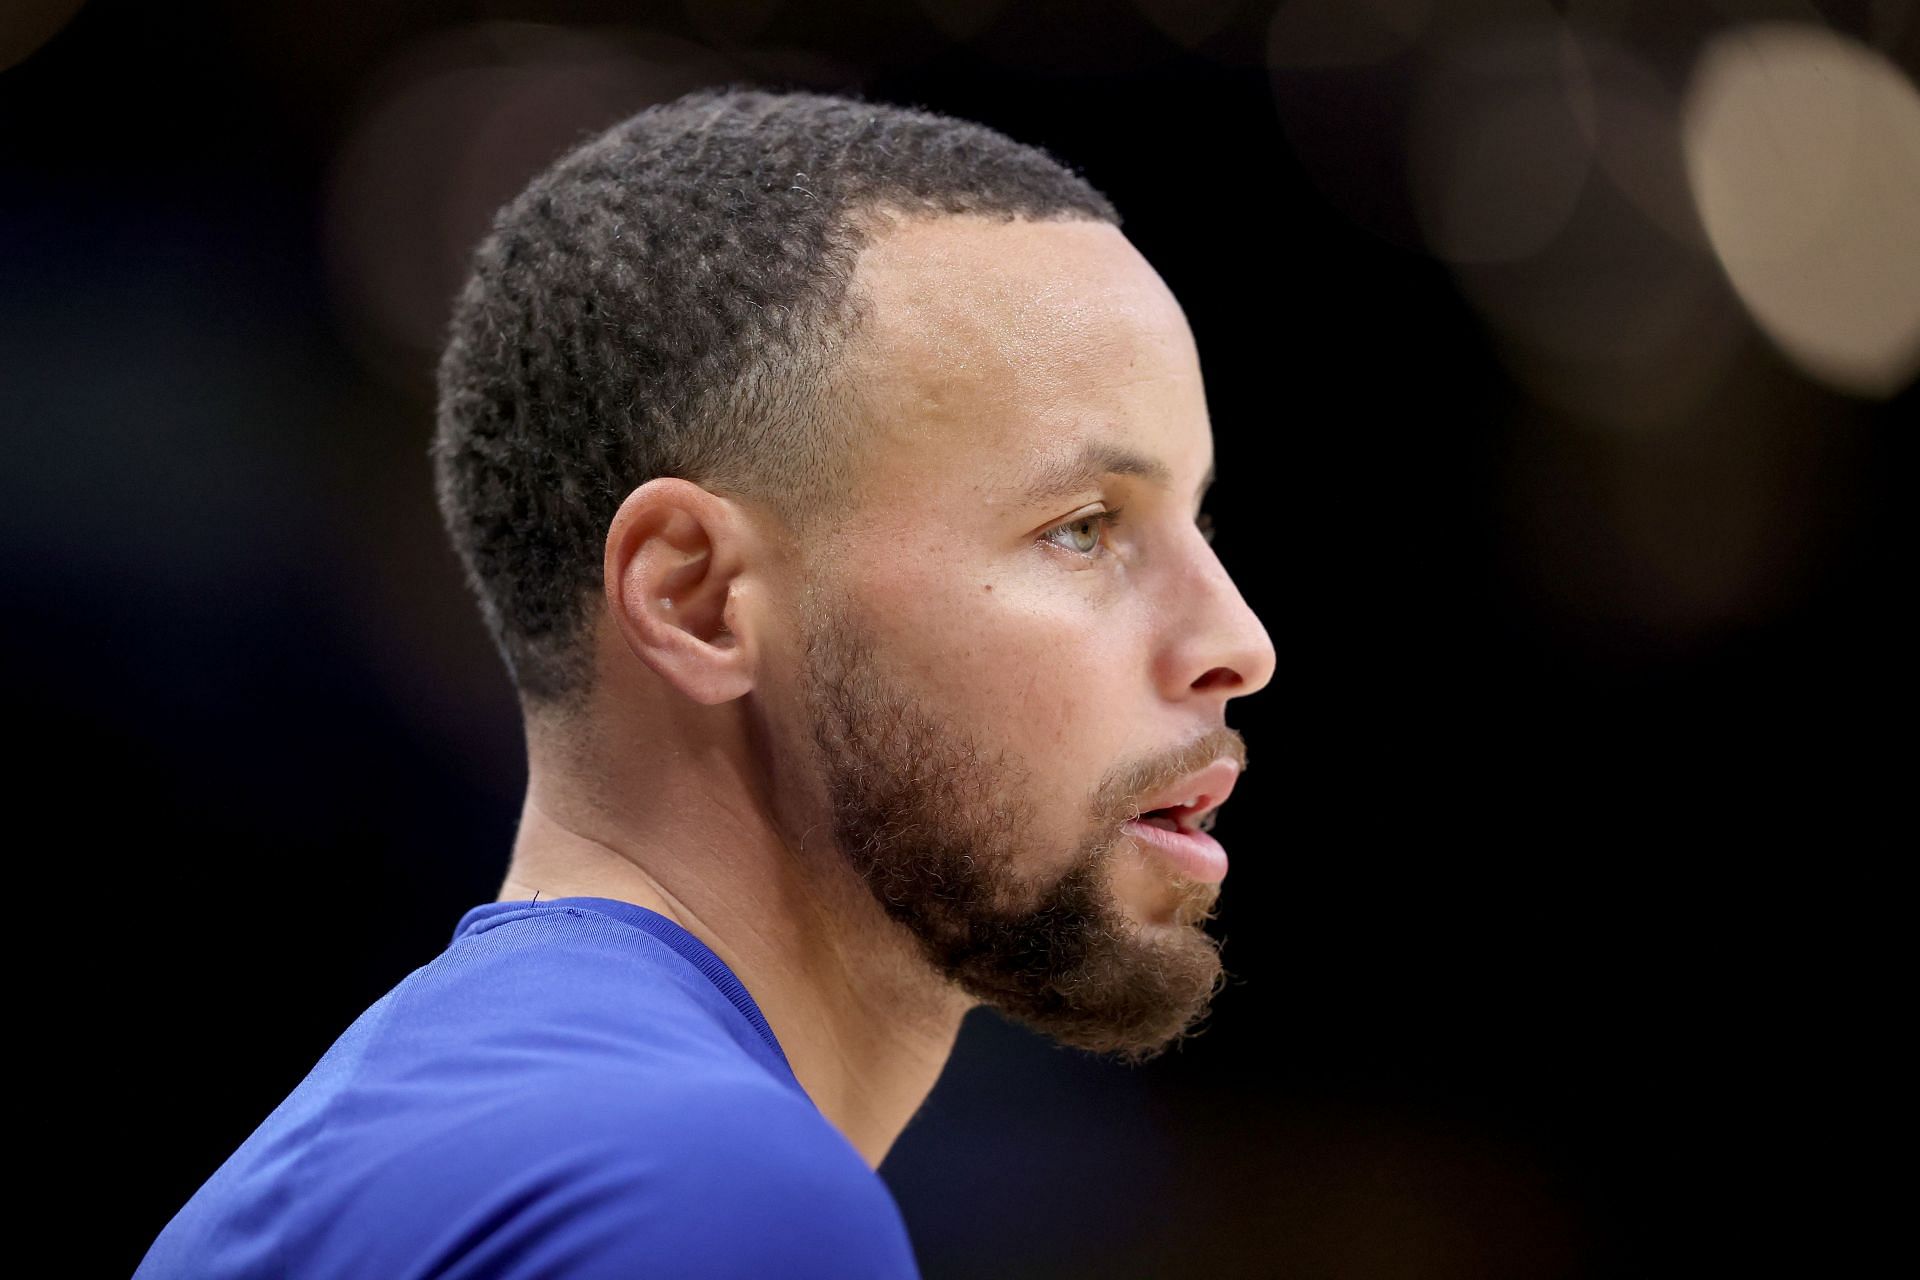 Golden State Warriors star guard Steph Curry has shot just 30 percent from downtown in the last three games